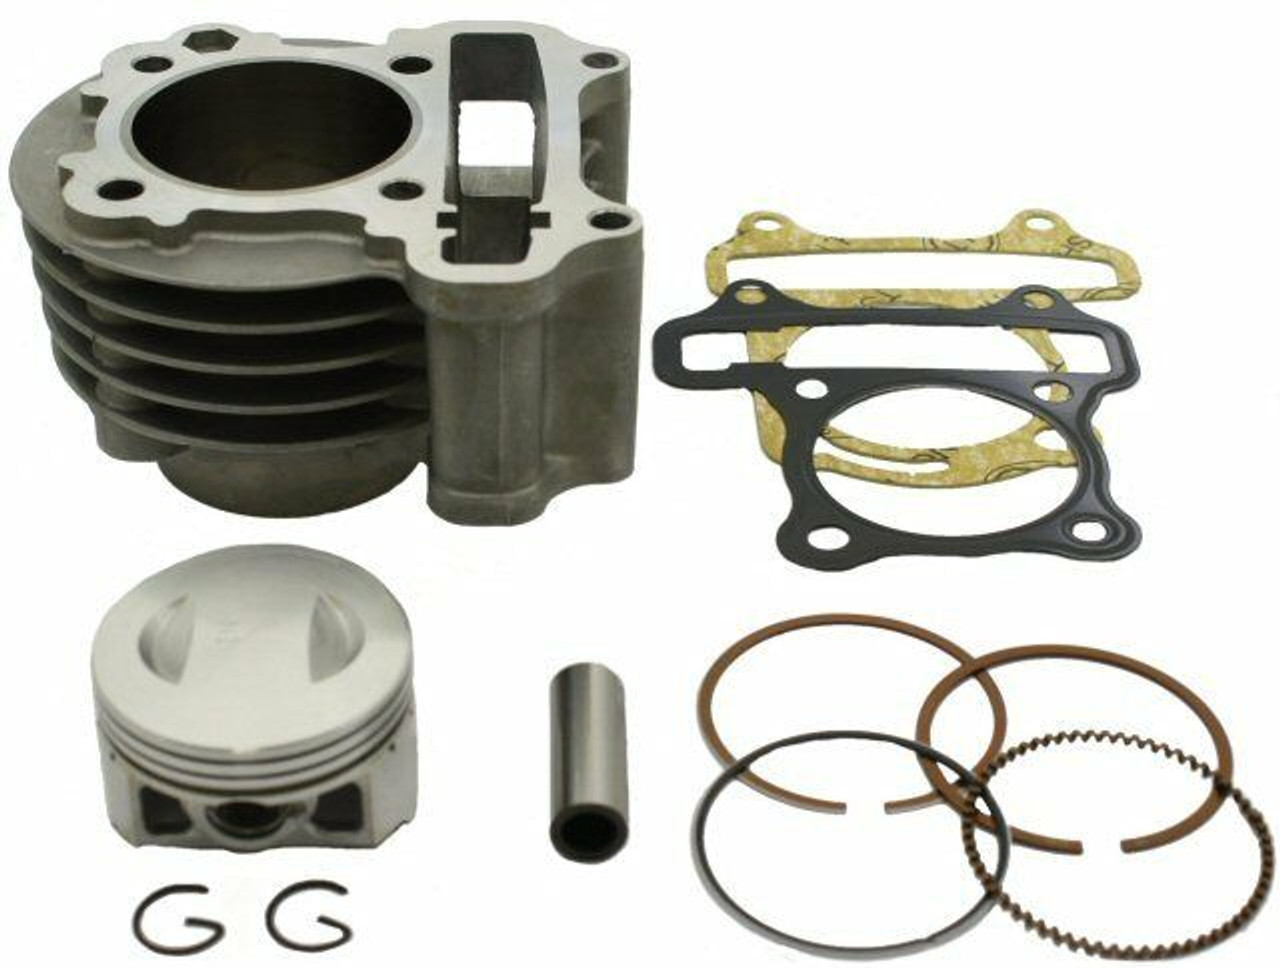 NCY BIG BORE CYLINDER KIT (52mm BORE, 88cc) FOR QMB139 50cc ENGINES